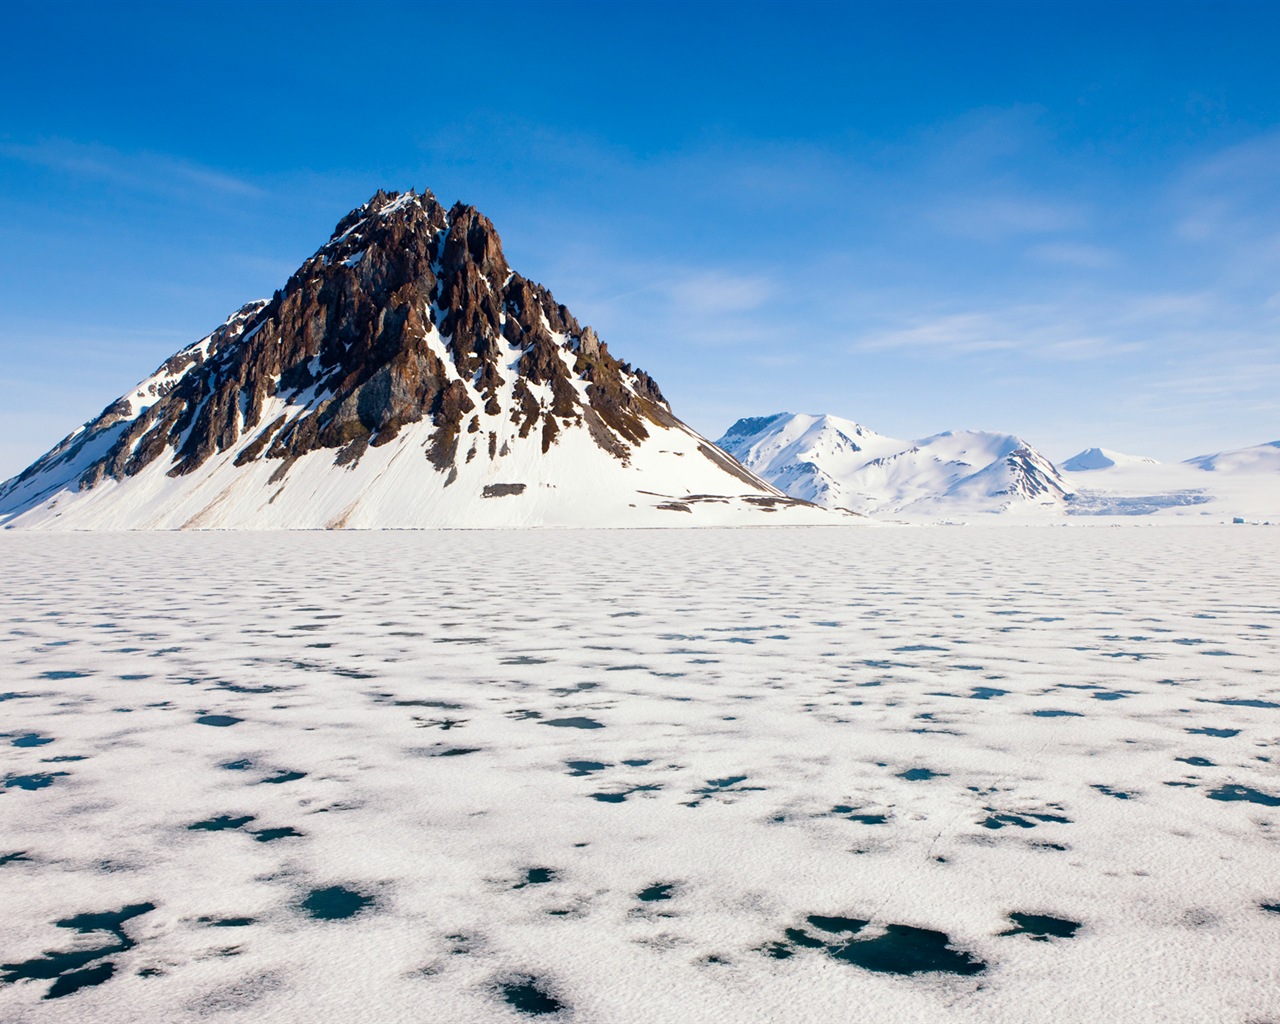 Windows 8 Wallpapers: Arctic, the nature ecological landscape, arctic animals #1 - 1280x1024